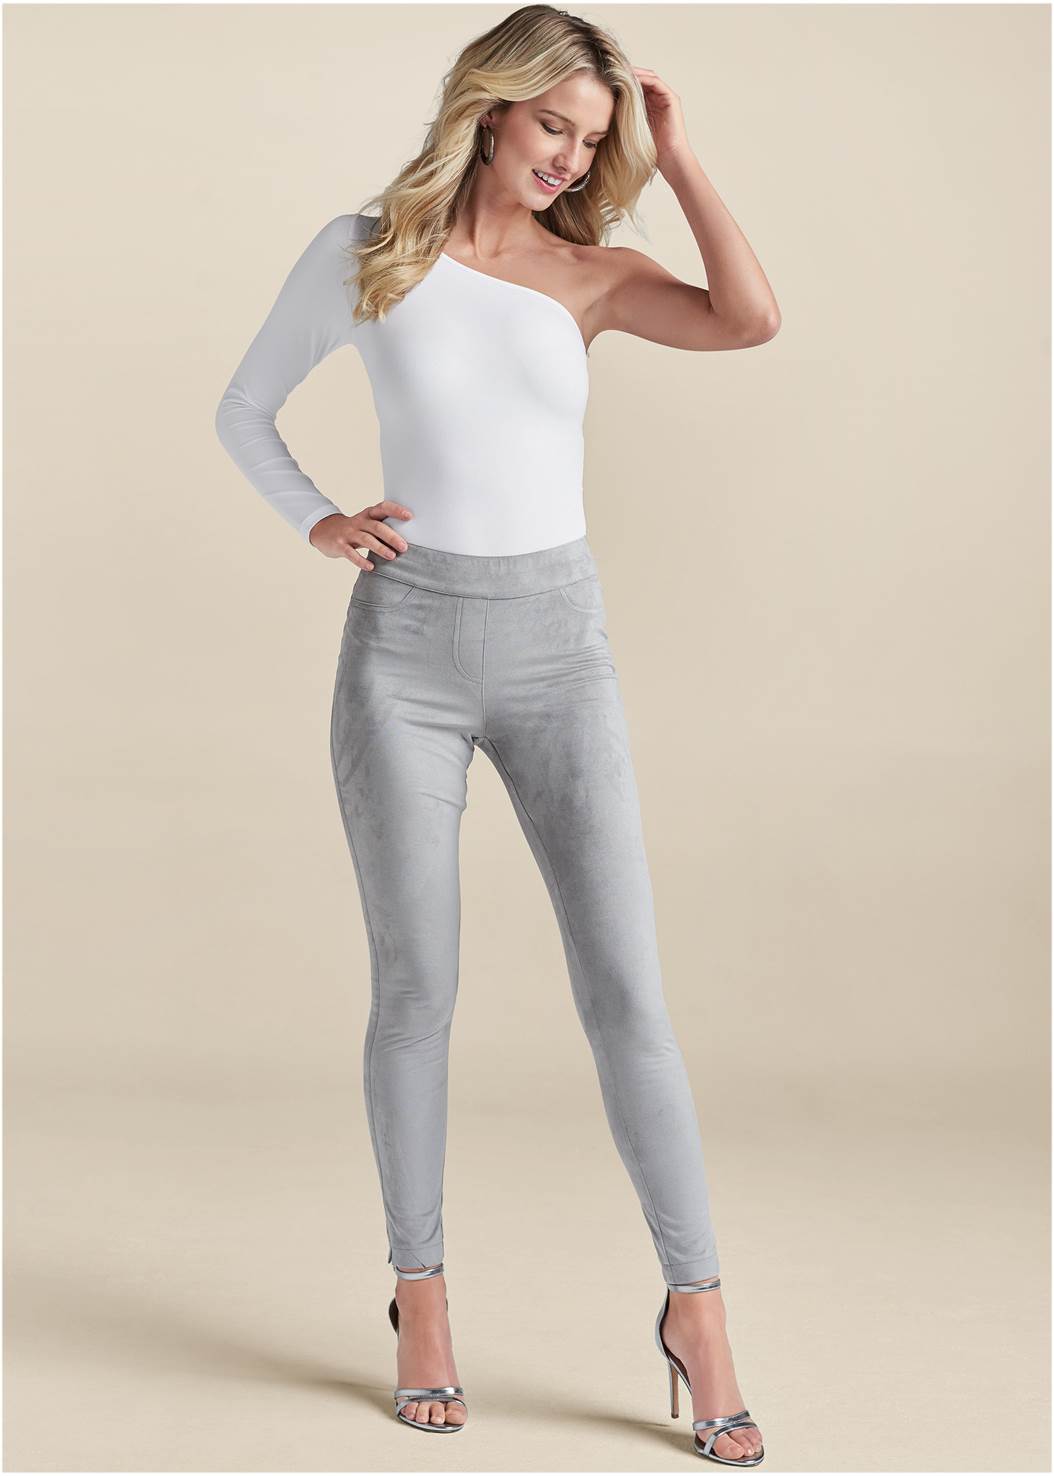 Crushed Velvet Leggings featuring an easy pull-on style and full elastic  waistband. • Elastic at Waist • Skinny Fit • Mid Rise • Pull up Style •  Care: Machine Wash Cold, Do